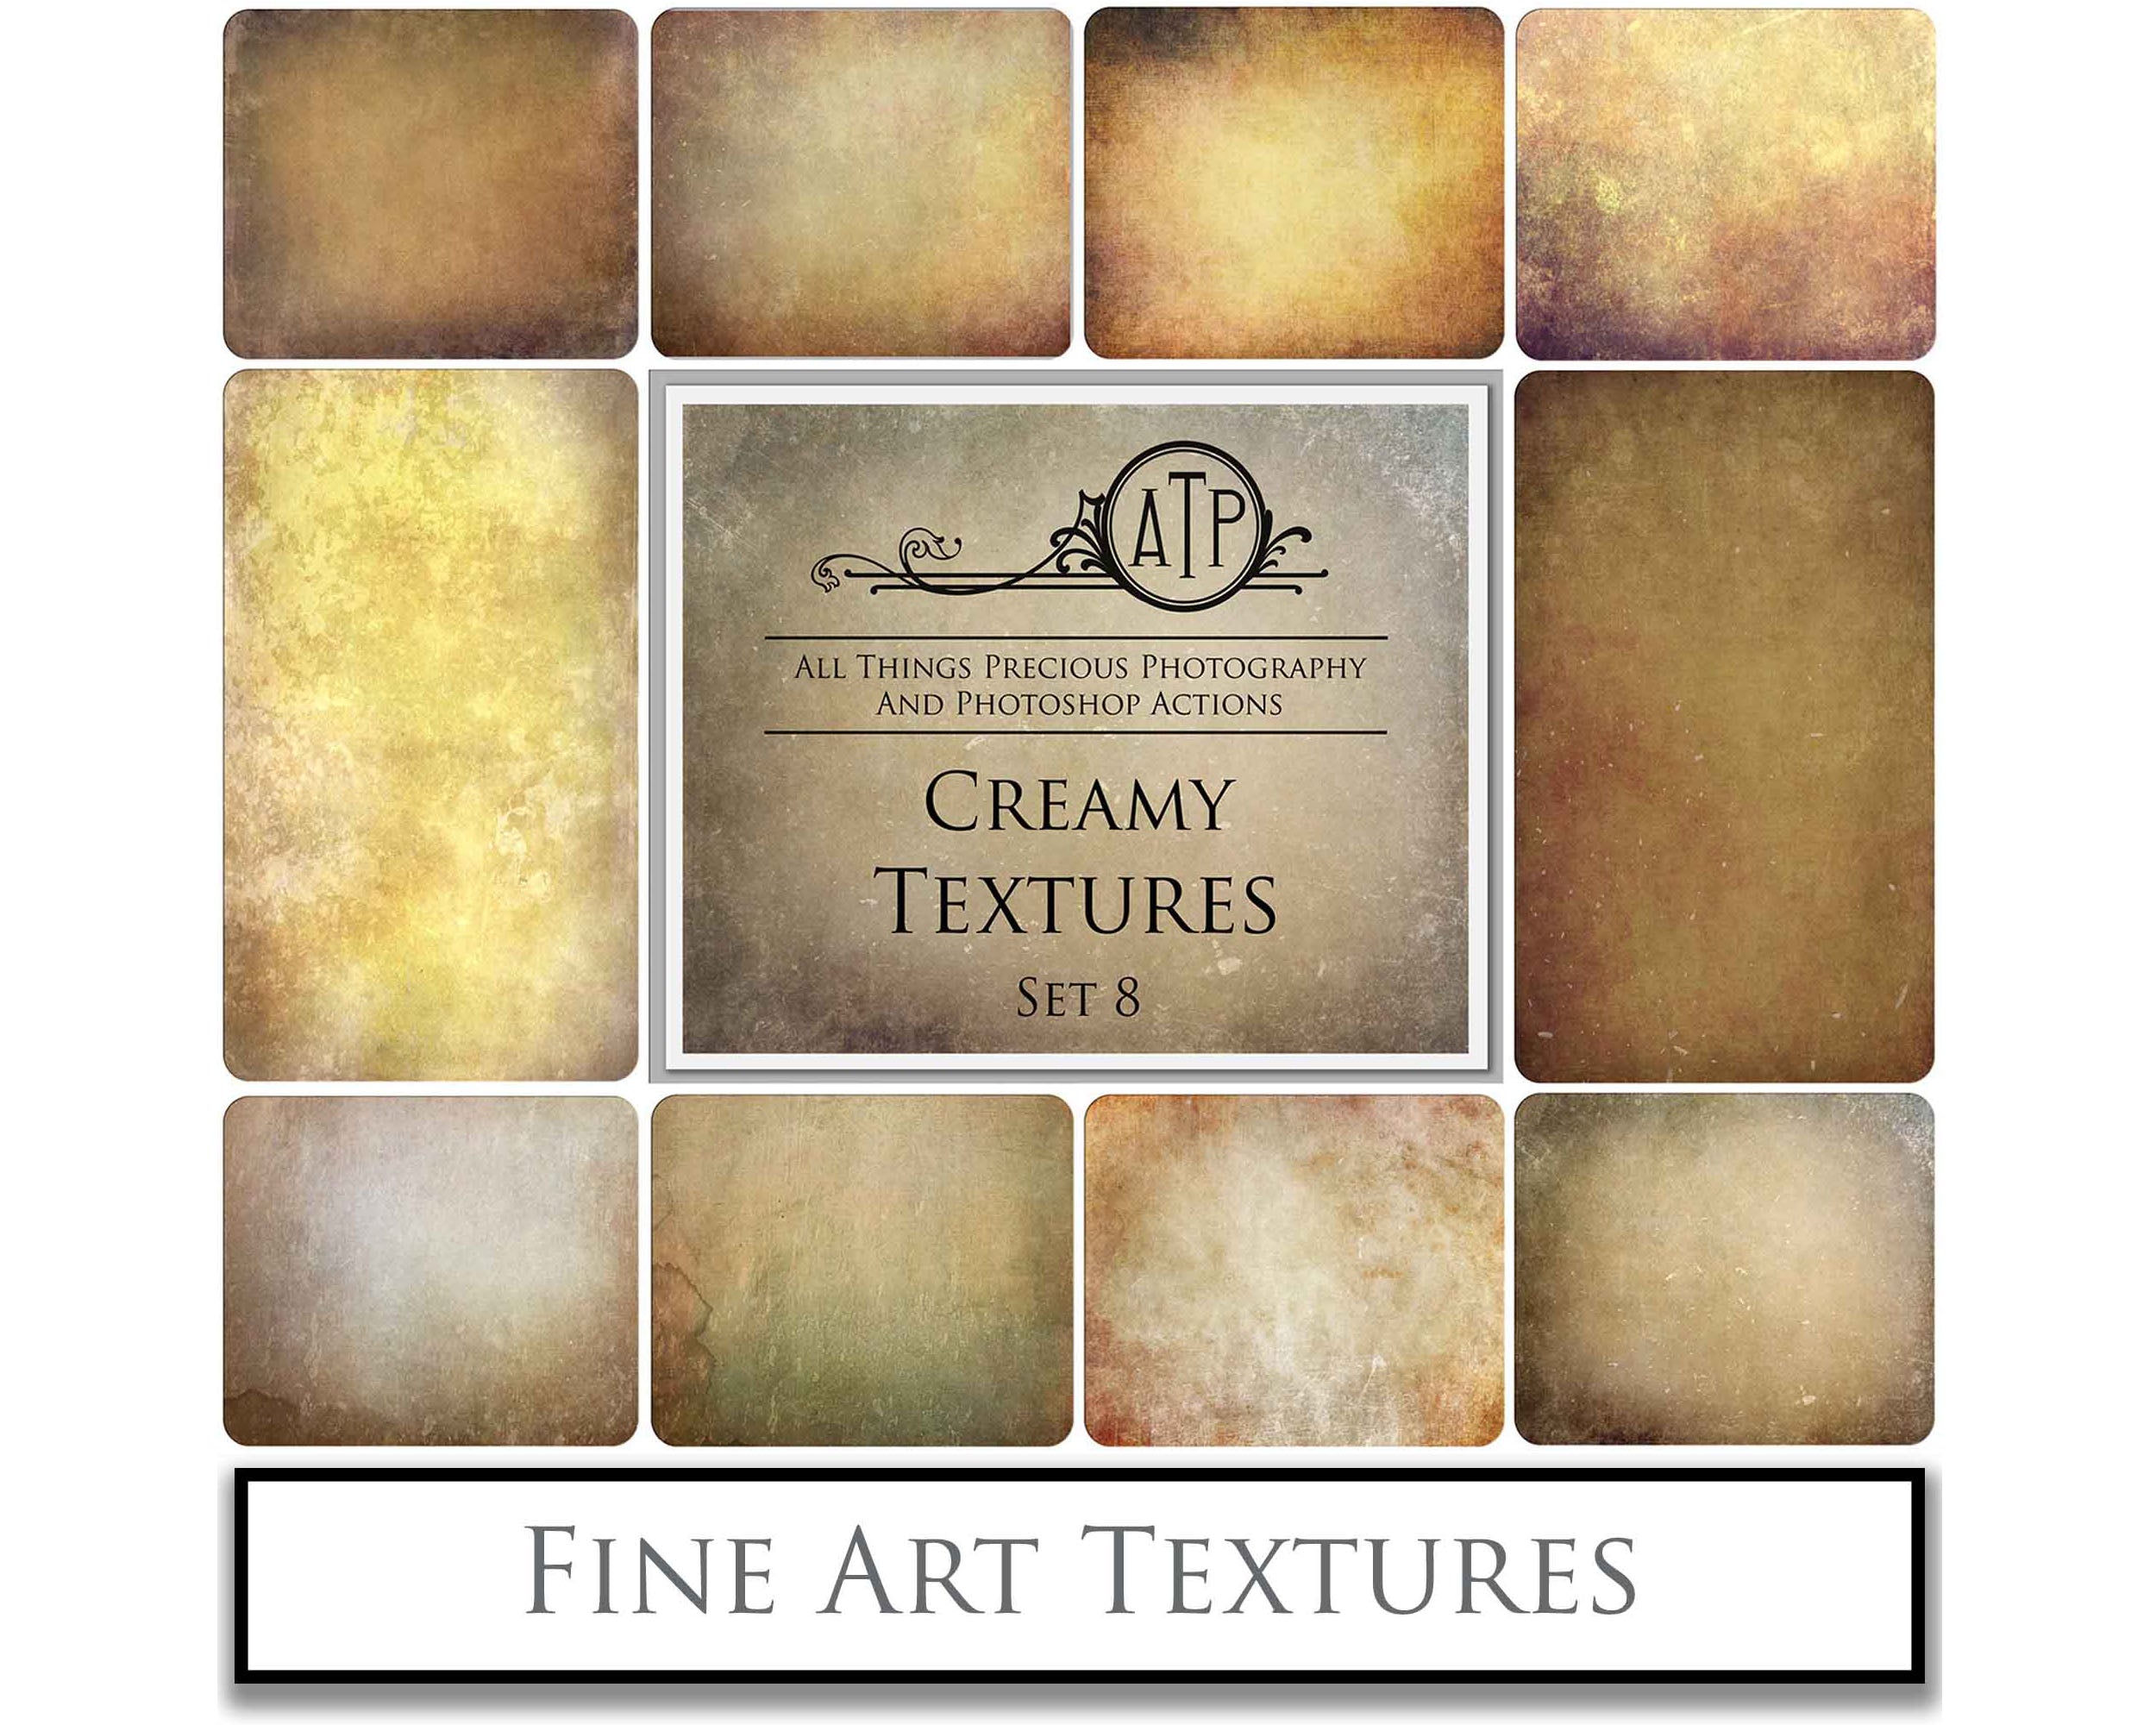 Rich warm and Creamy tinted textures. Fine Art Texture for photographers and digital editing. Photo Overlays. Antique, Vintage, Grunge, Light, Dark Bundle. Textured printable Canvas, Colour, Monochrome, Bundle. High resolution, 300dpi Graphic Assets for photography, digital scrapbooking and design. By ATP Textures